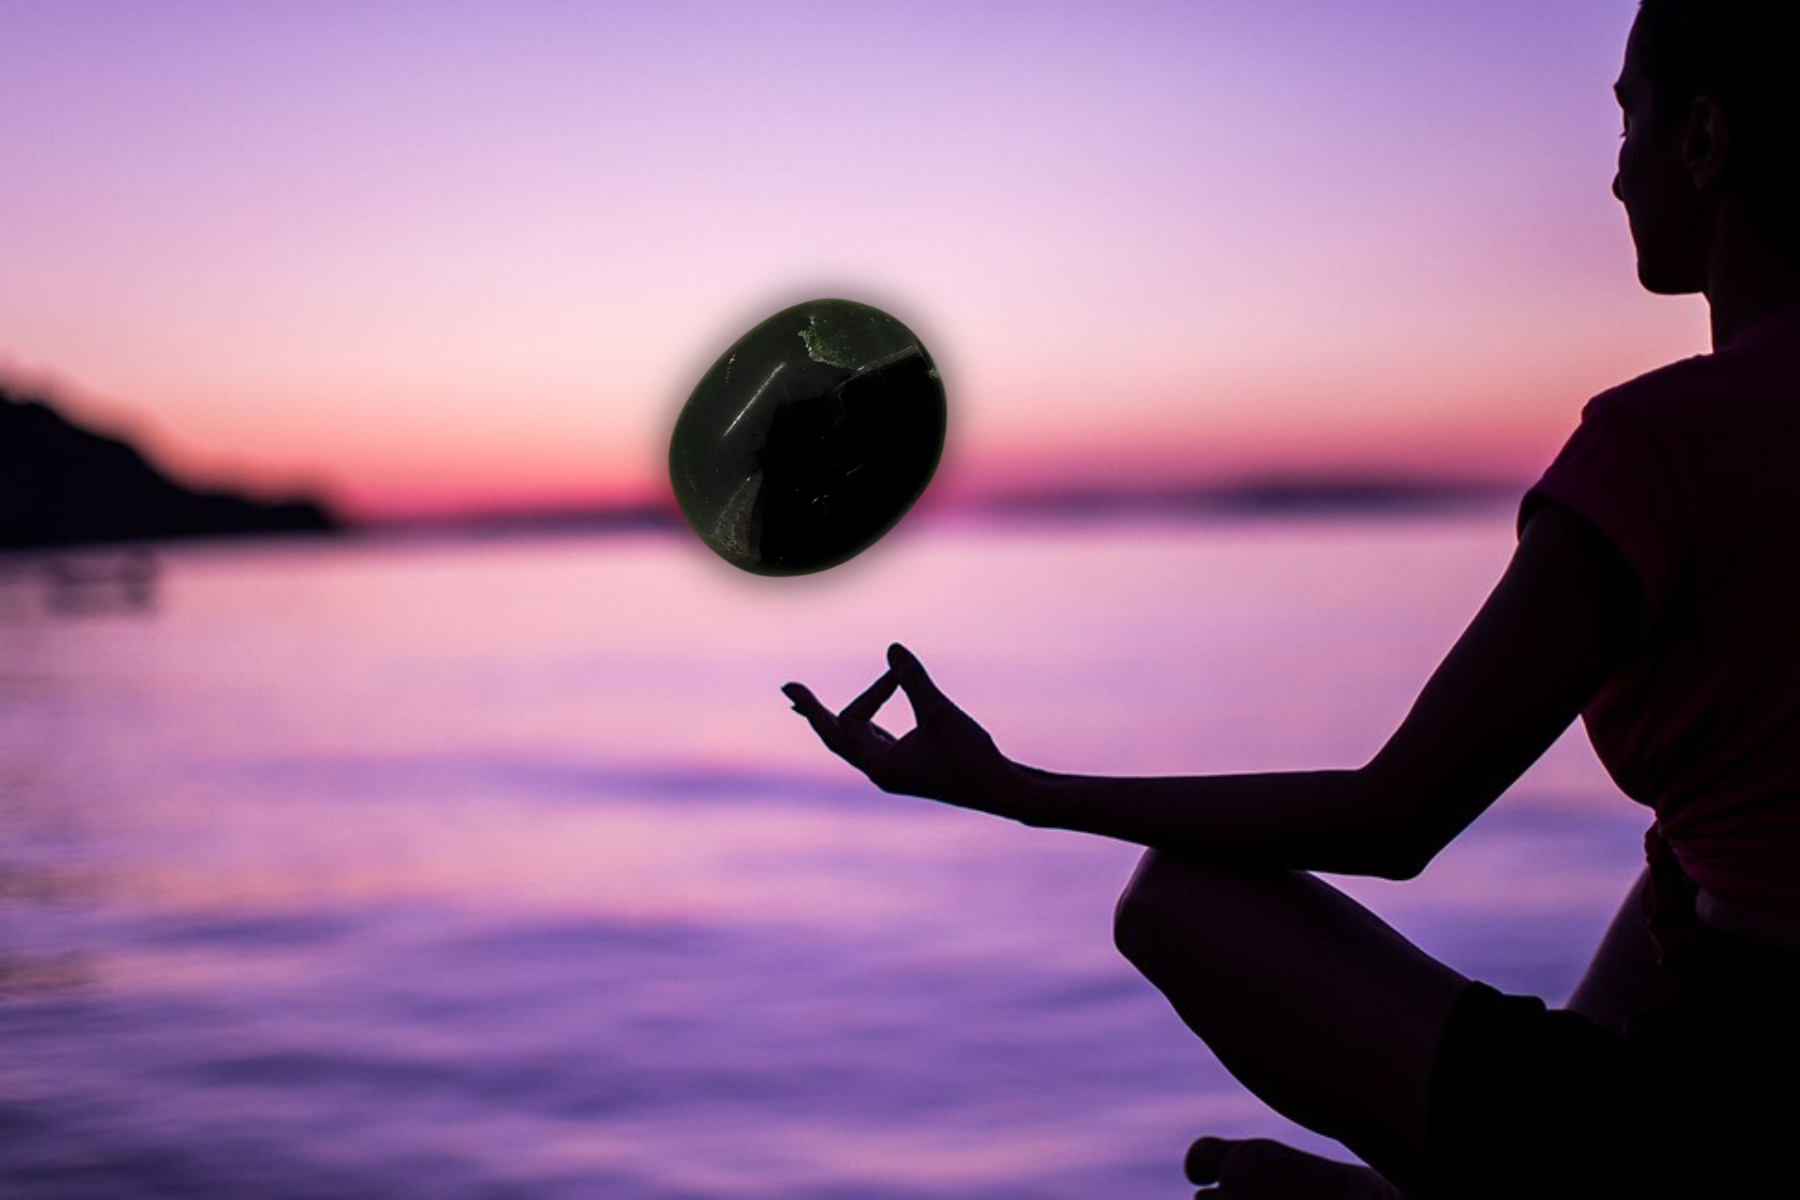 A silhouette of a woman meditating with a floating black agate